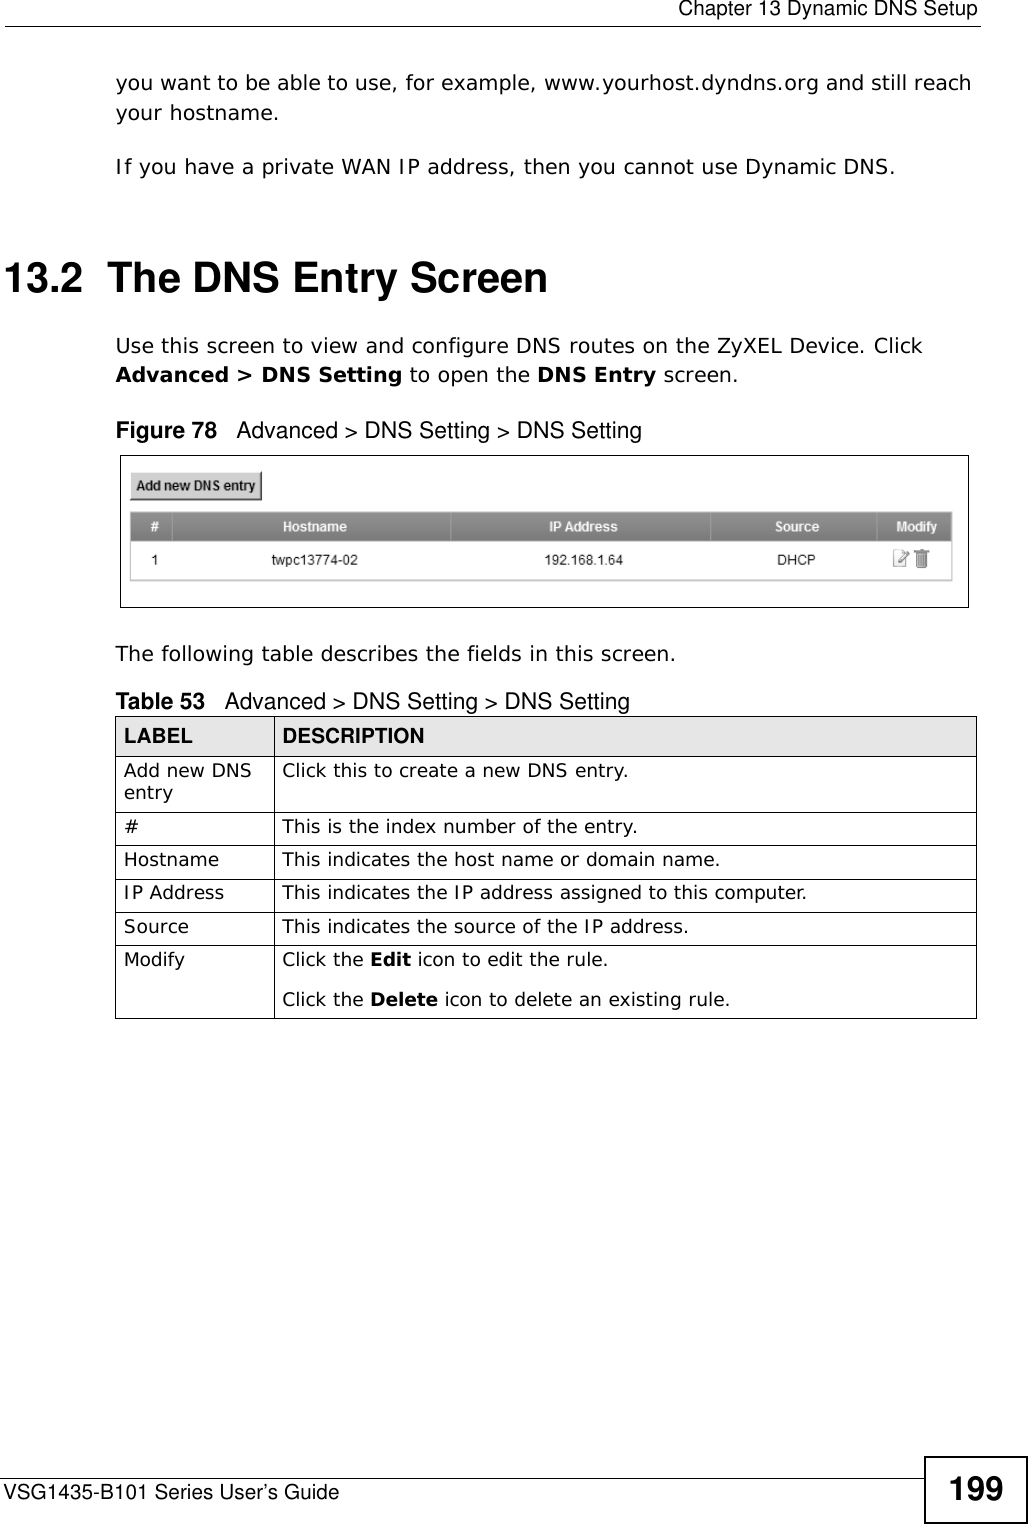  Chapter 13 Dynamic DNS SetupVSG1435-B101 Series User’s Guide 199you want to be able to use, for example, www.yourhost.dyndns.org and still reach your hostname.If you have a private WAN IP address, then you cannot use Dynamic DNS.13.2  The DNS Entry ScreenUse this screen to view and configure DNS routes on the ZyXEL Device. Click Advanced &gt; DNS Setting to open the DNS Entry screen.Figure 78   Advanced &gt; DNS Setting &gt; DNS SettingThe following table describes the fields in this screen. Table 53   Advanced &gt; DNS Setting &gt; DNS SettingLABEL DESCRIPTIONAdd new DNS entry Click this to create a new DNS entry.#This is the index number of the entry.Hostname This indicates the host name or domain name.IP Address This indicates the IP address assigned to this computer.Source This indicates the source of the IP address.Modify Click the Edit icon to edit the rule.Click the Delete icon to delete an existing rule.